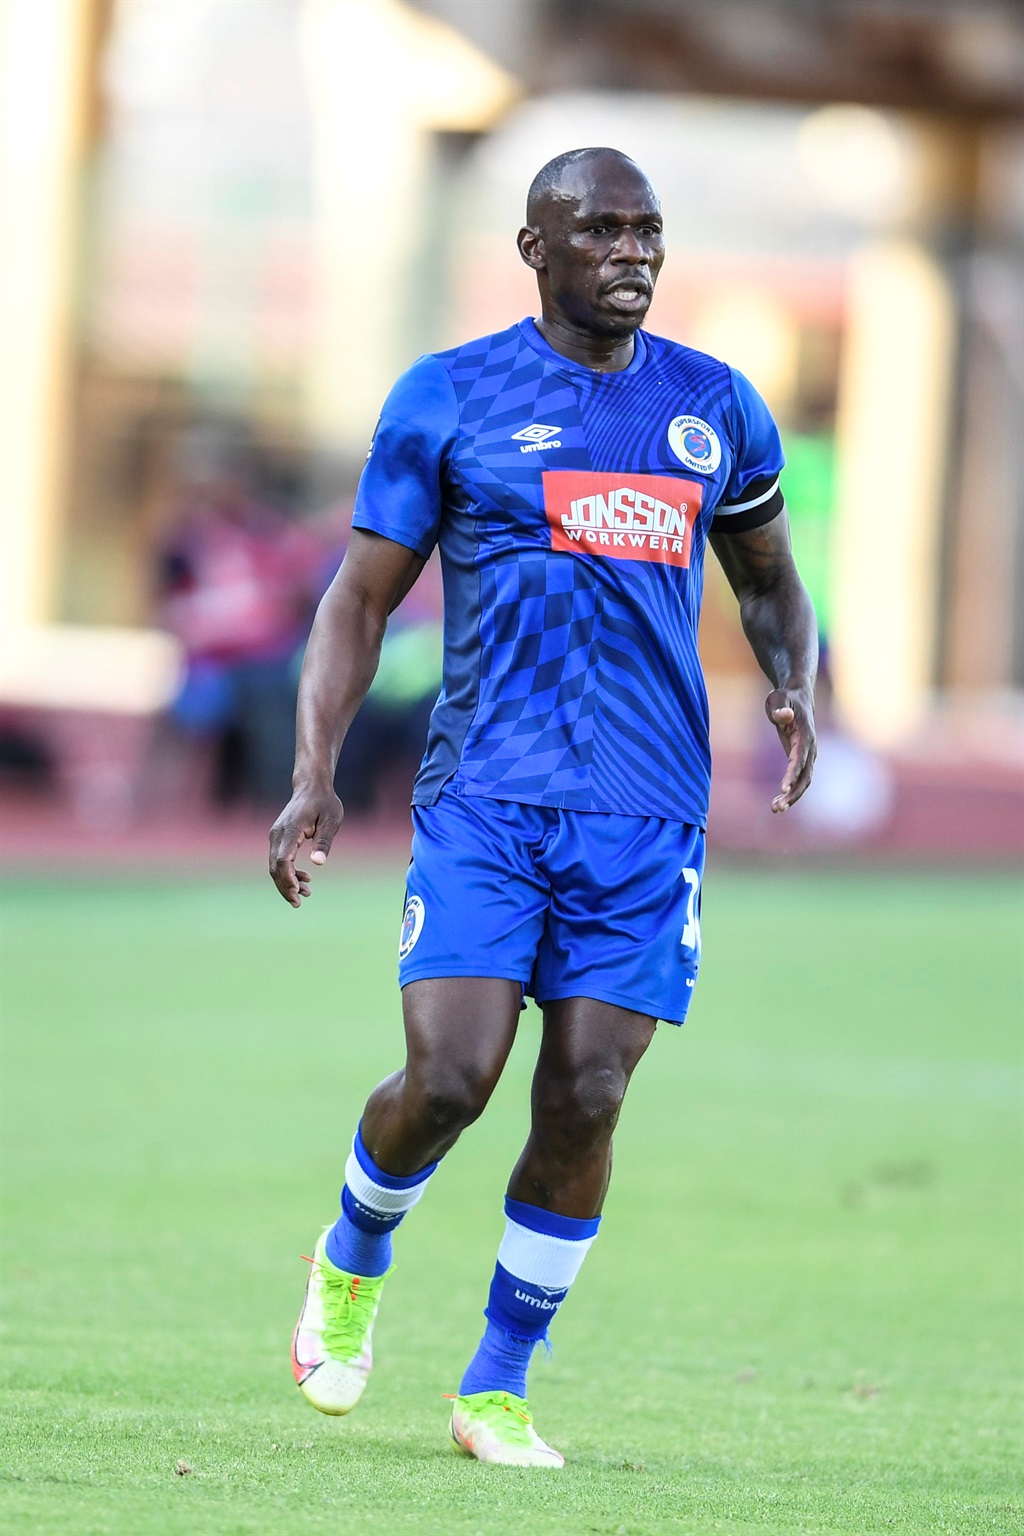 PRETORIA, SOUTH AFRICA - JANUARY 22:  Onismor Bhasera of SuperSport United during the DStv Premiership match between SuperSport United and Richards Bay FC at Lucas Moripe Stadium on January 22, 2023 in Pretoria, South Africa. (Photo by Lefty Shivambu/Gallo Images)